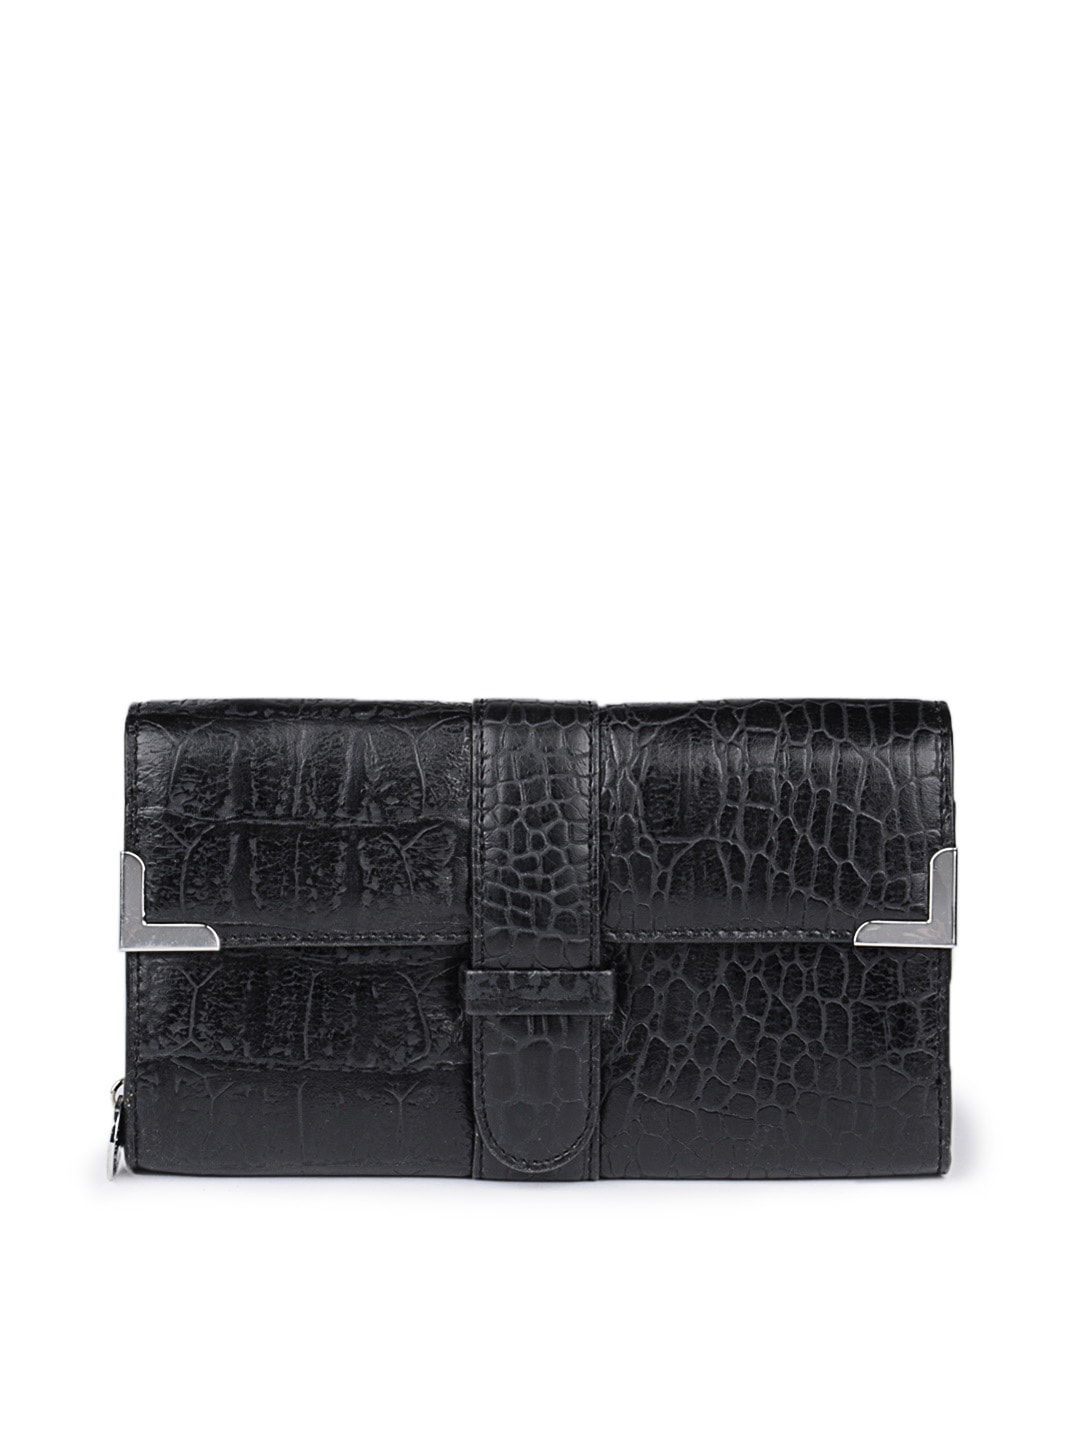 French Connection Women Black Wallet